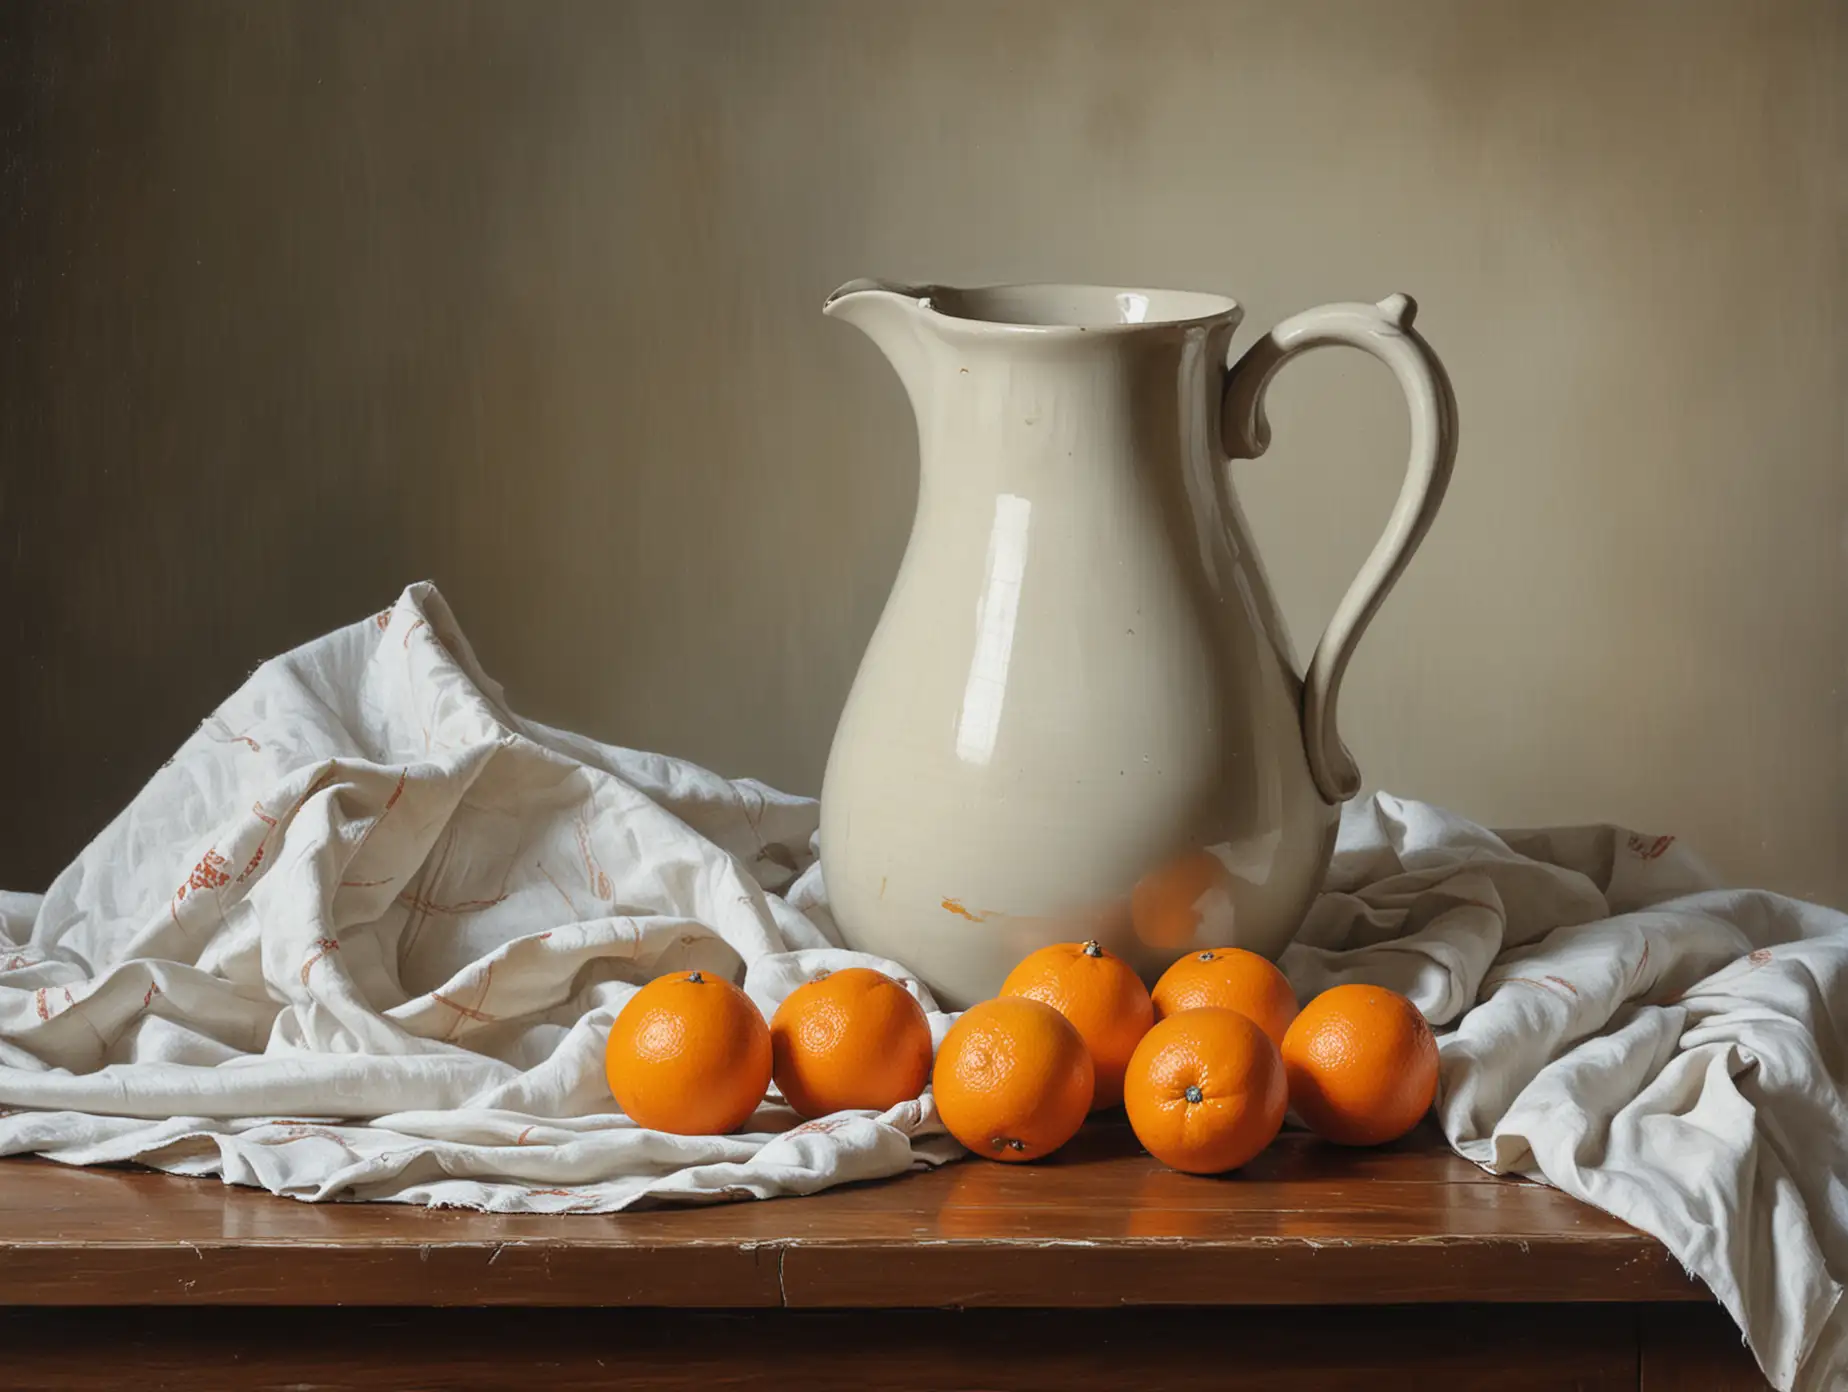 A STILL LIFE PAINTING OF A PITCHER, SITTING ON A TABLE, COVERED WITH A CLOTH. AND ORANGES